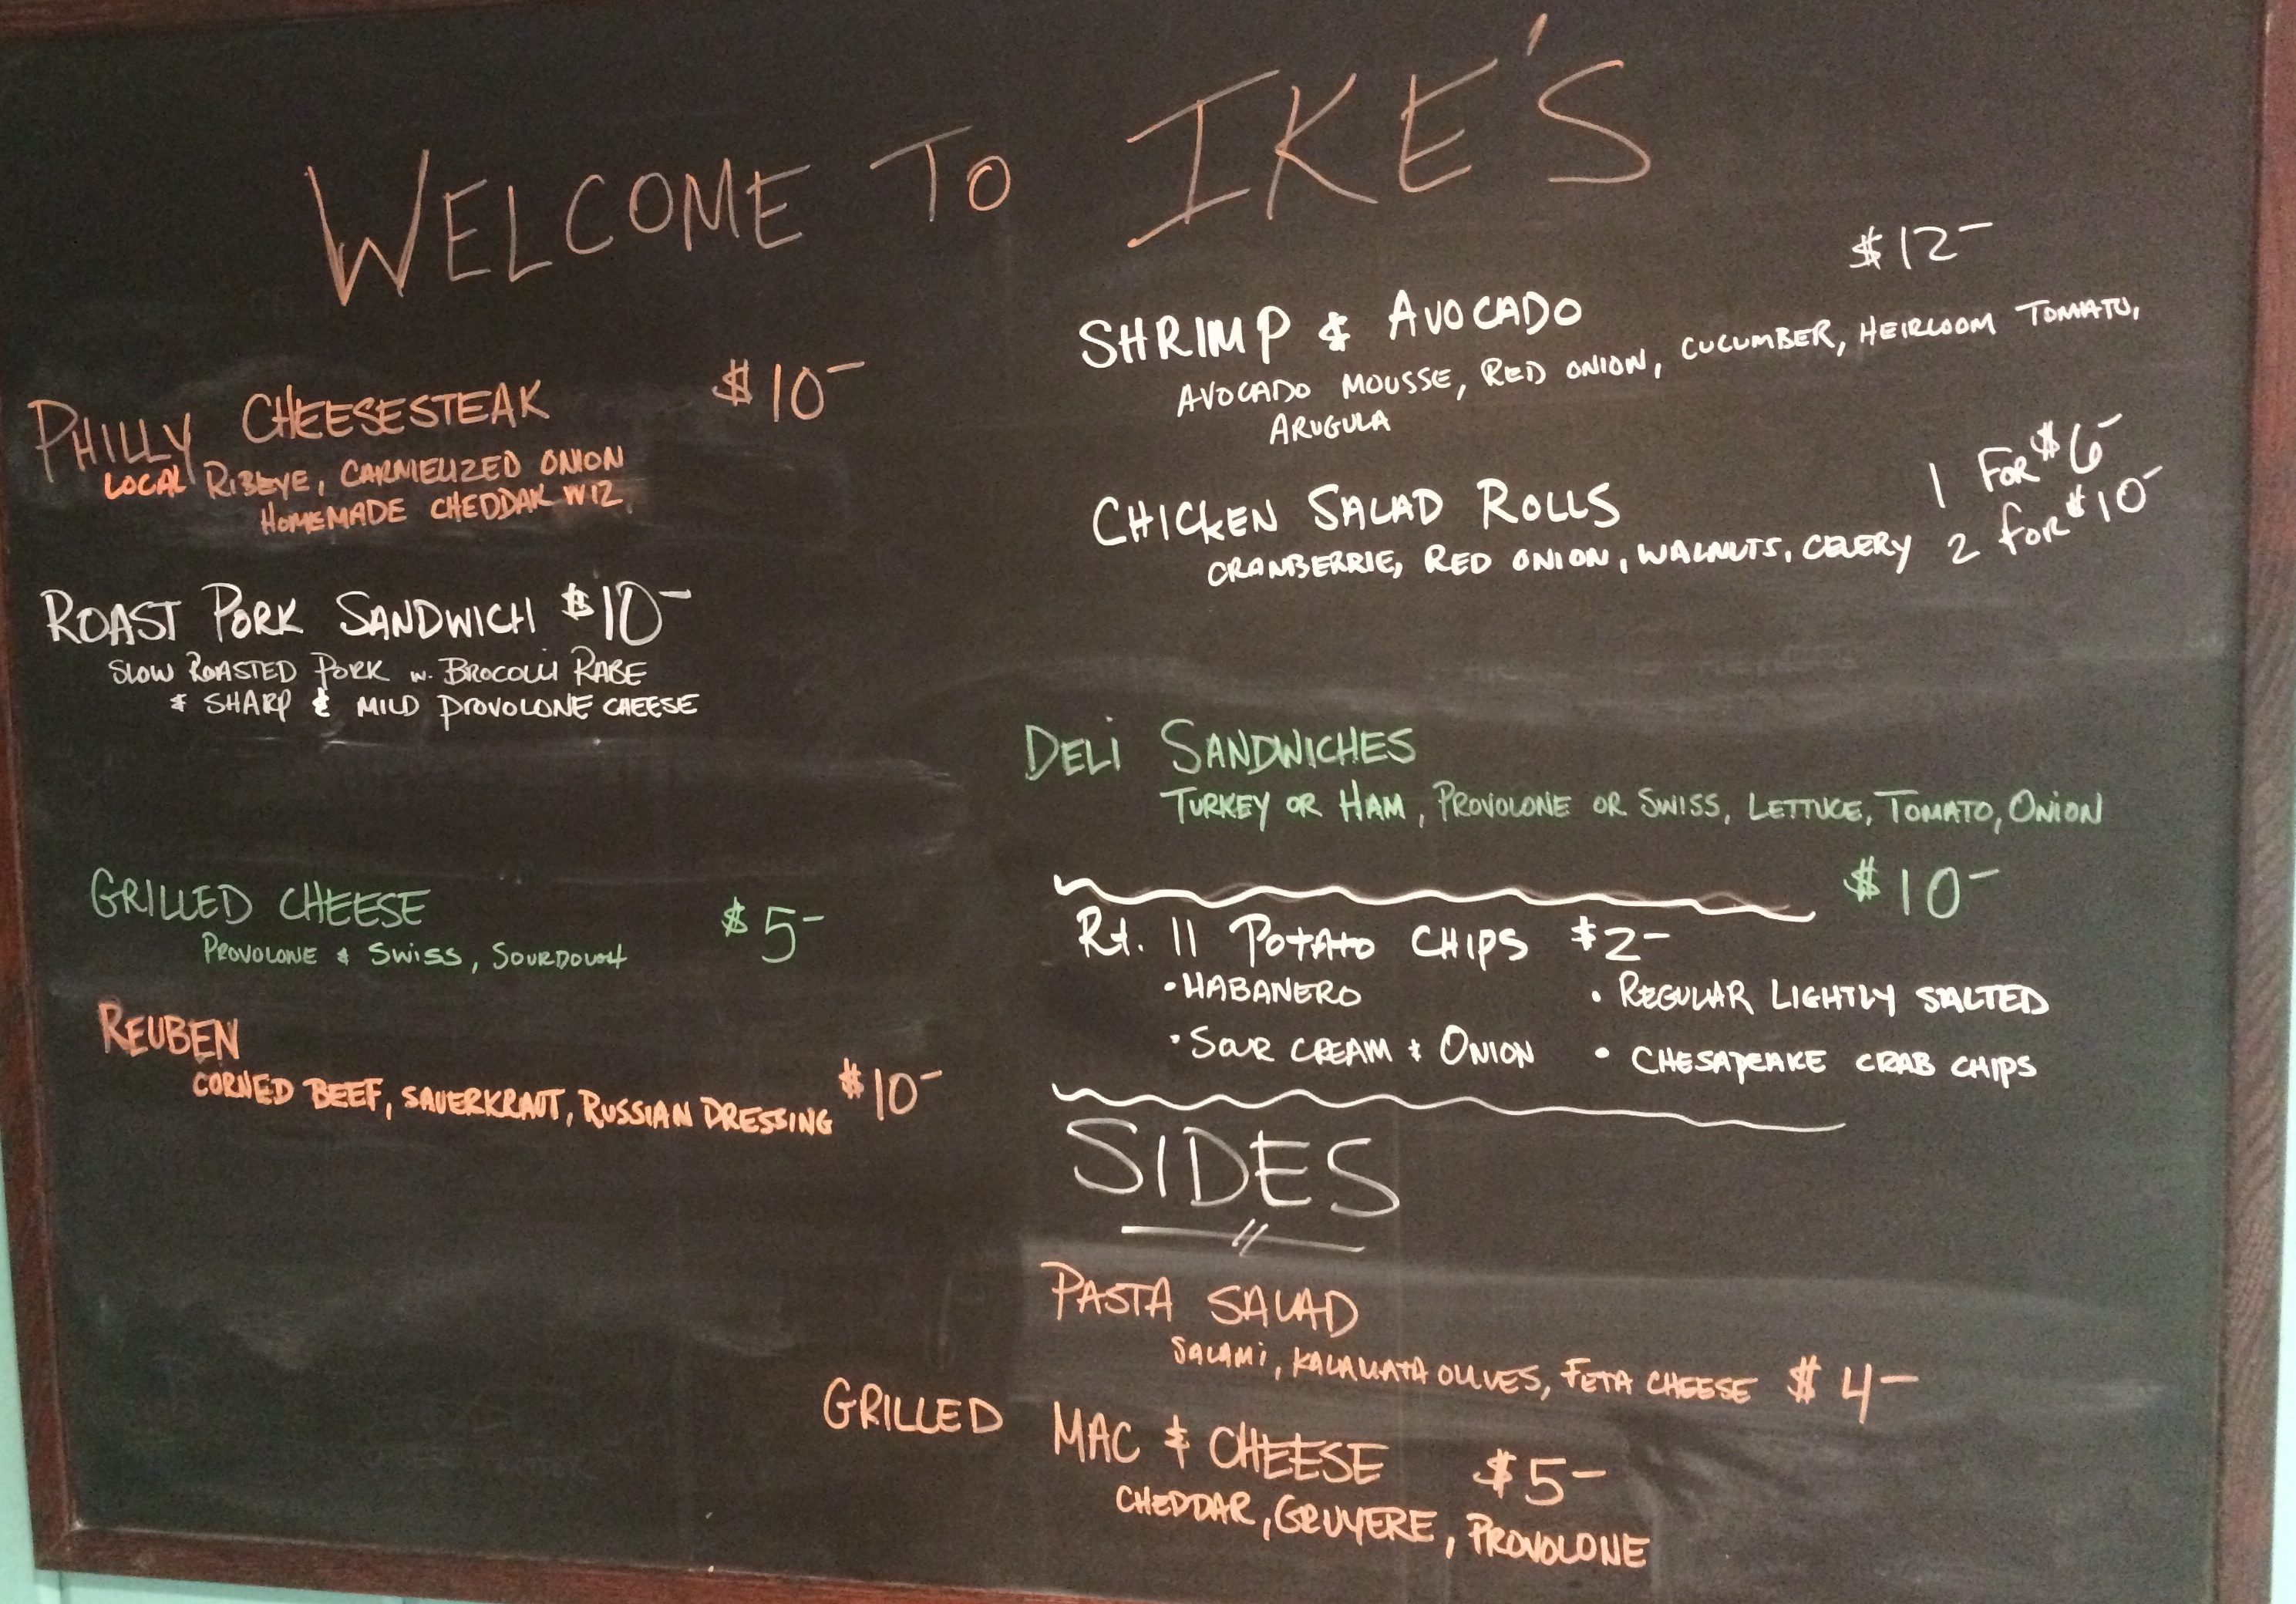 Ike’s Signature Sandwiches now open downtown